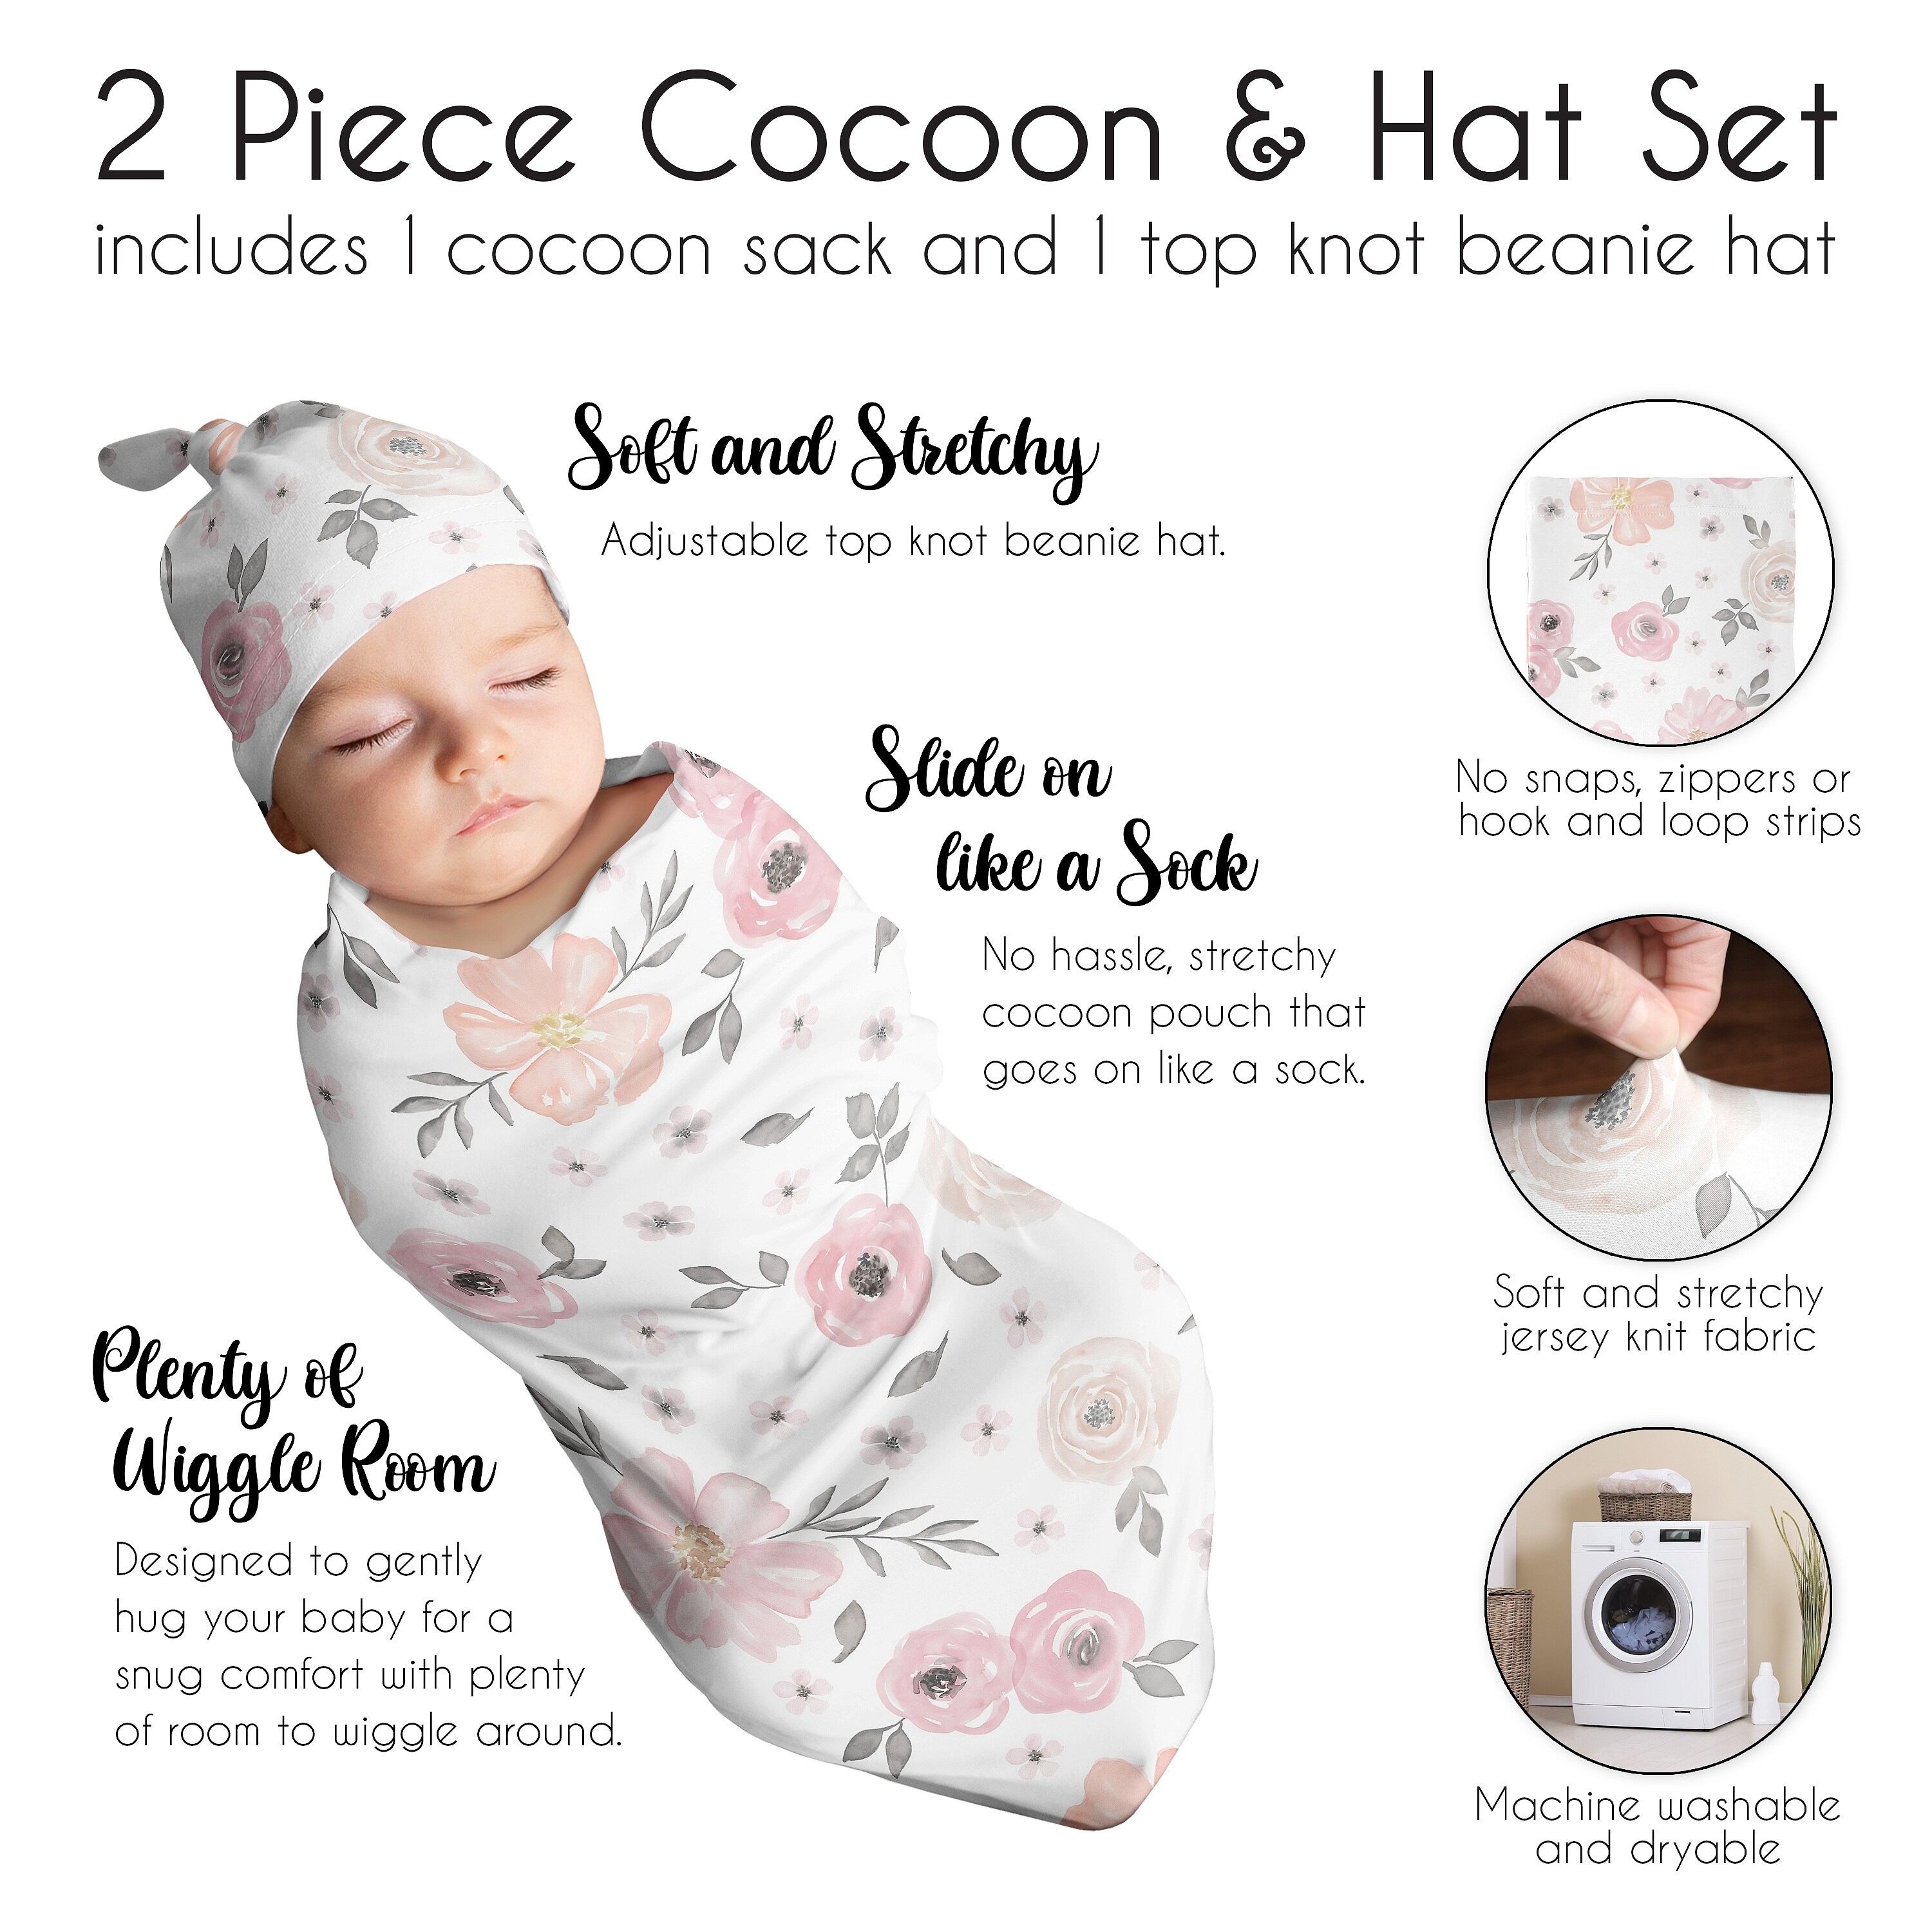 Watercolor Floral Collection Girl Baby Cocoon and Beanie Hat Sleep Sack - 2pc Set - Pink Grey White Boho Shabby Chic Rose Flower